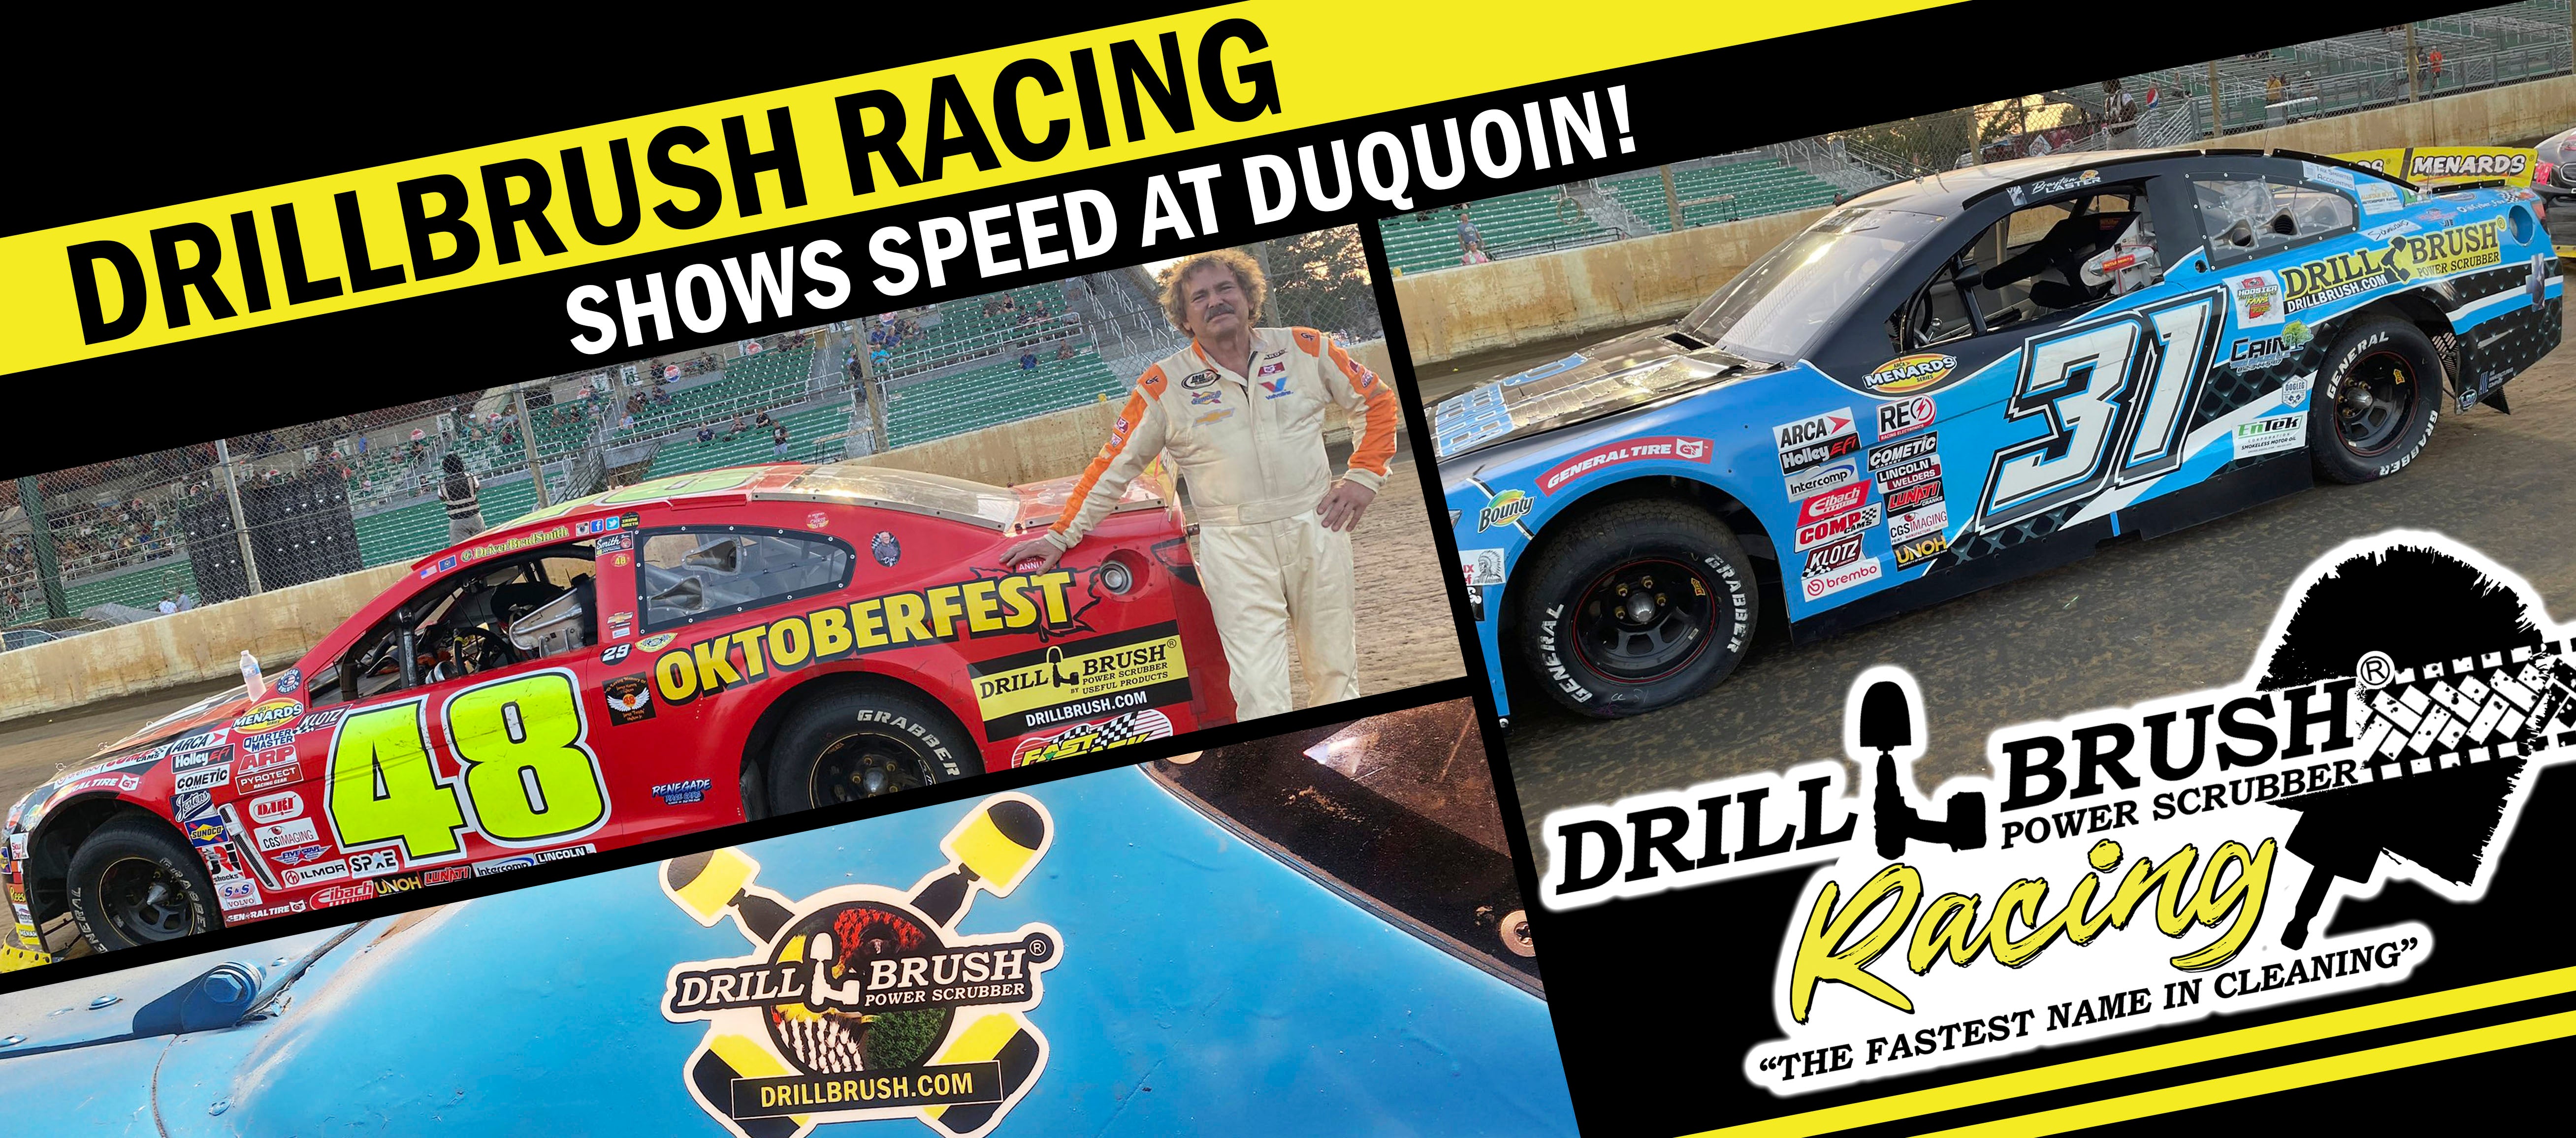 Drillbrush Racing Drivers Show Speed in DuQuoin, Achieve Season Best Finishes